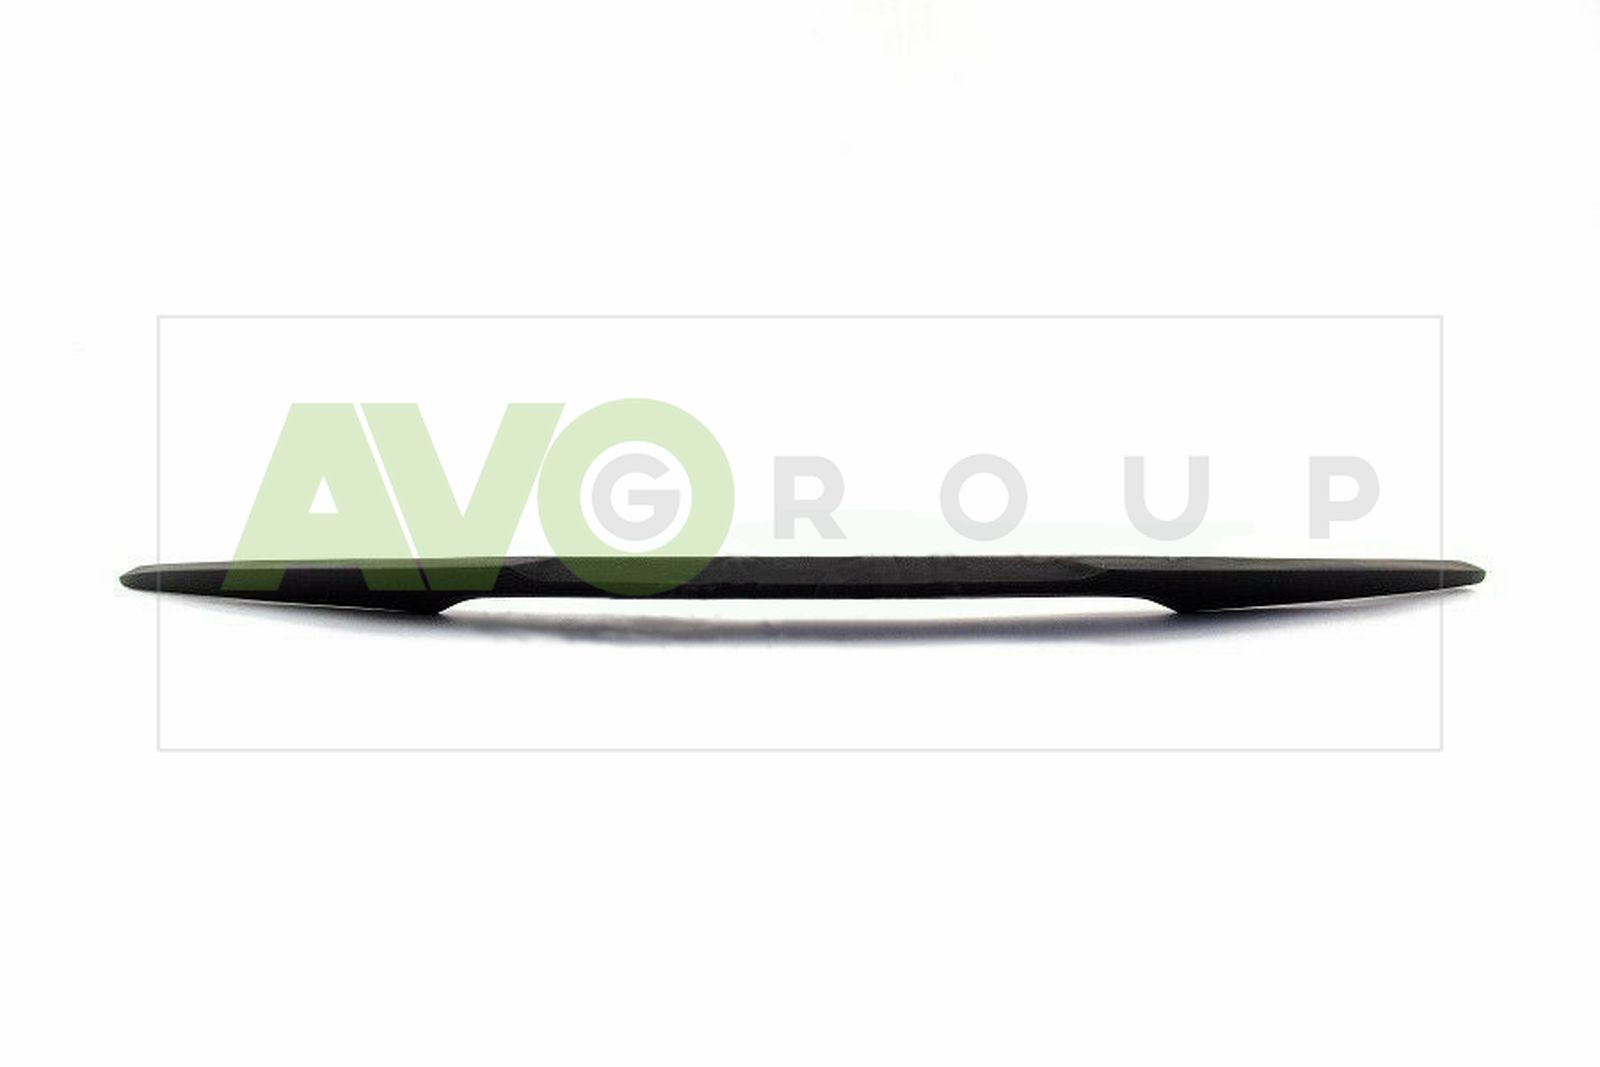 M4 Style Trunk boot spoiler for AUDI A4 B8 2008-2016